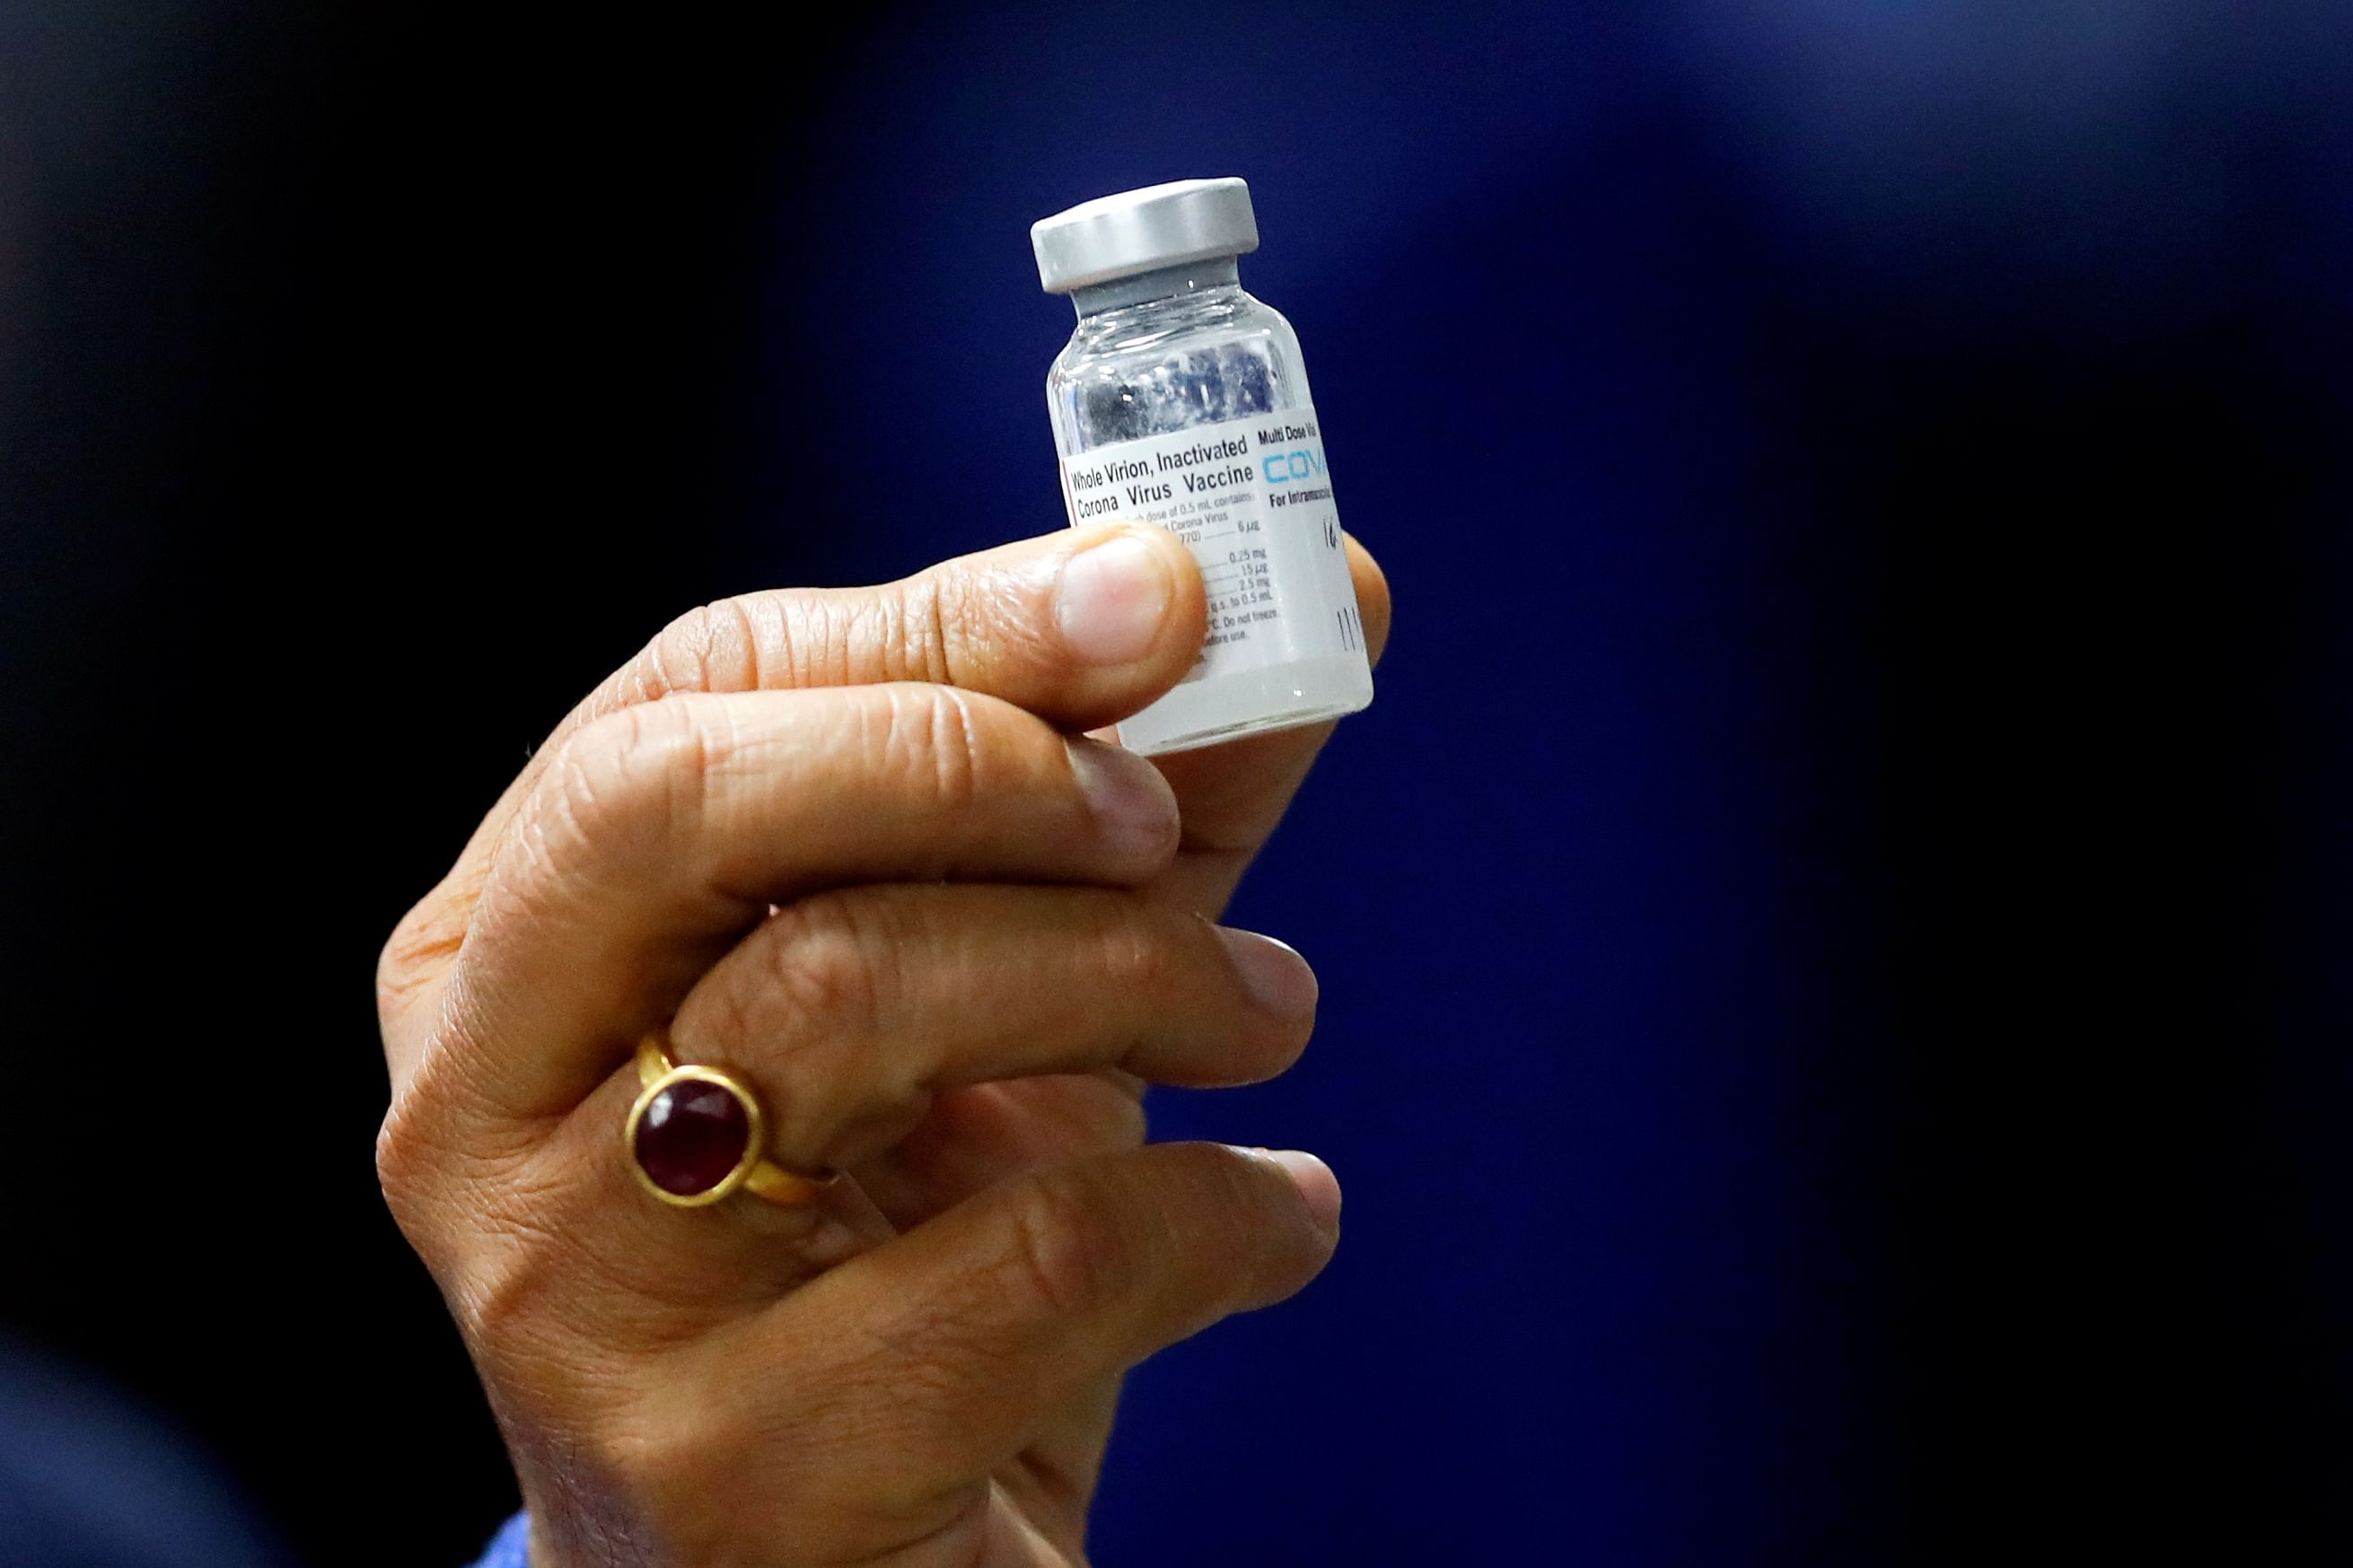 Union Health Minister Harsh Vardhan holds a dose of Bharat Biotech's Covid-19 vaccine called COVAXIN during a vaccination campaign at All India Institute of Medical Sciences (AIIMS) hospital in New Delhi, January 16, 2021. Credit: REUTERS File Photo